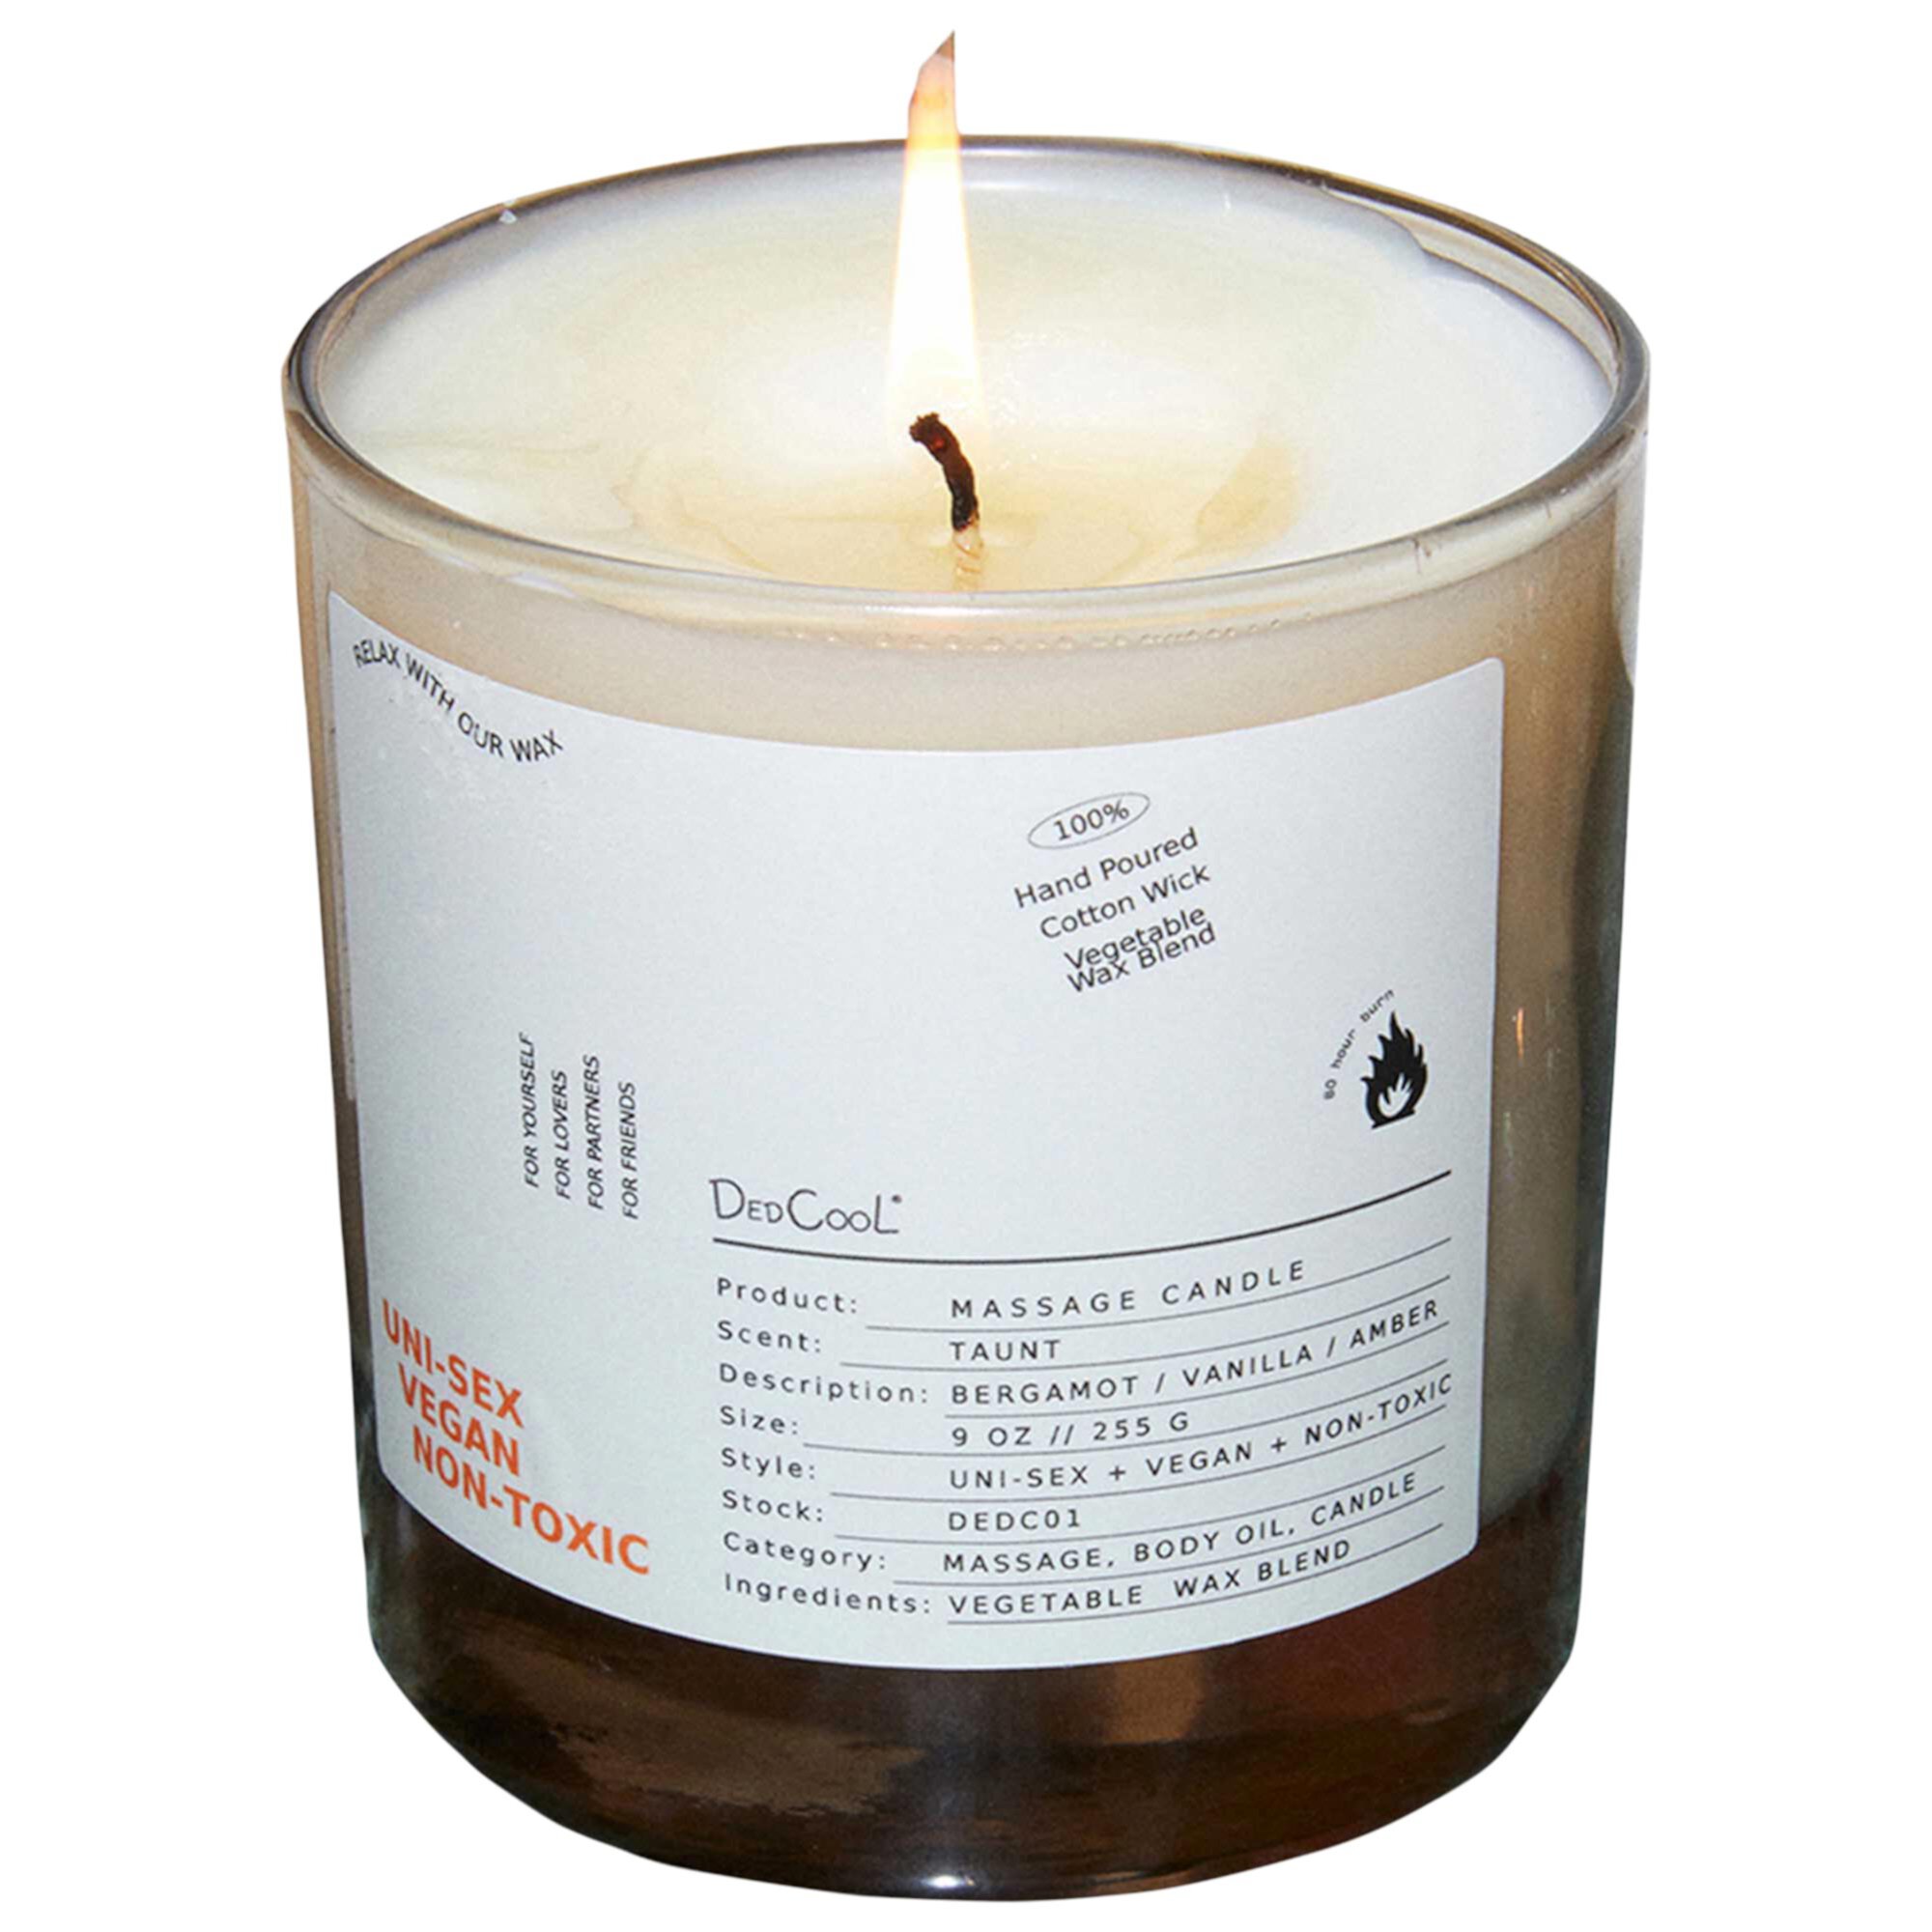 01 "Taunt" Massage Candle DedCool